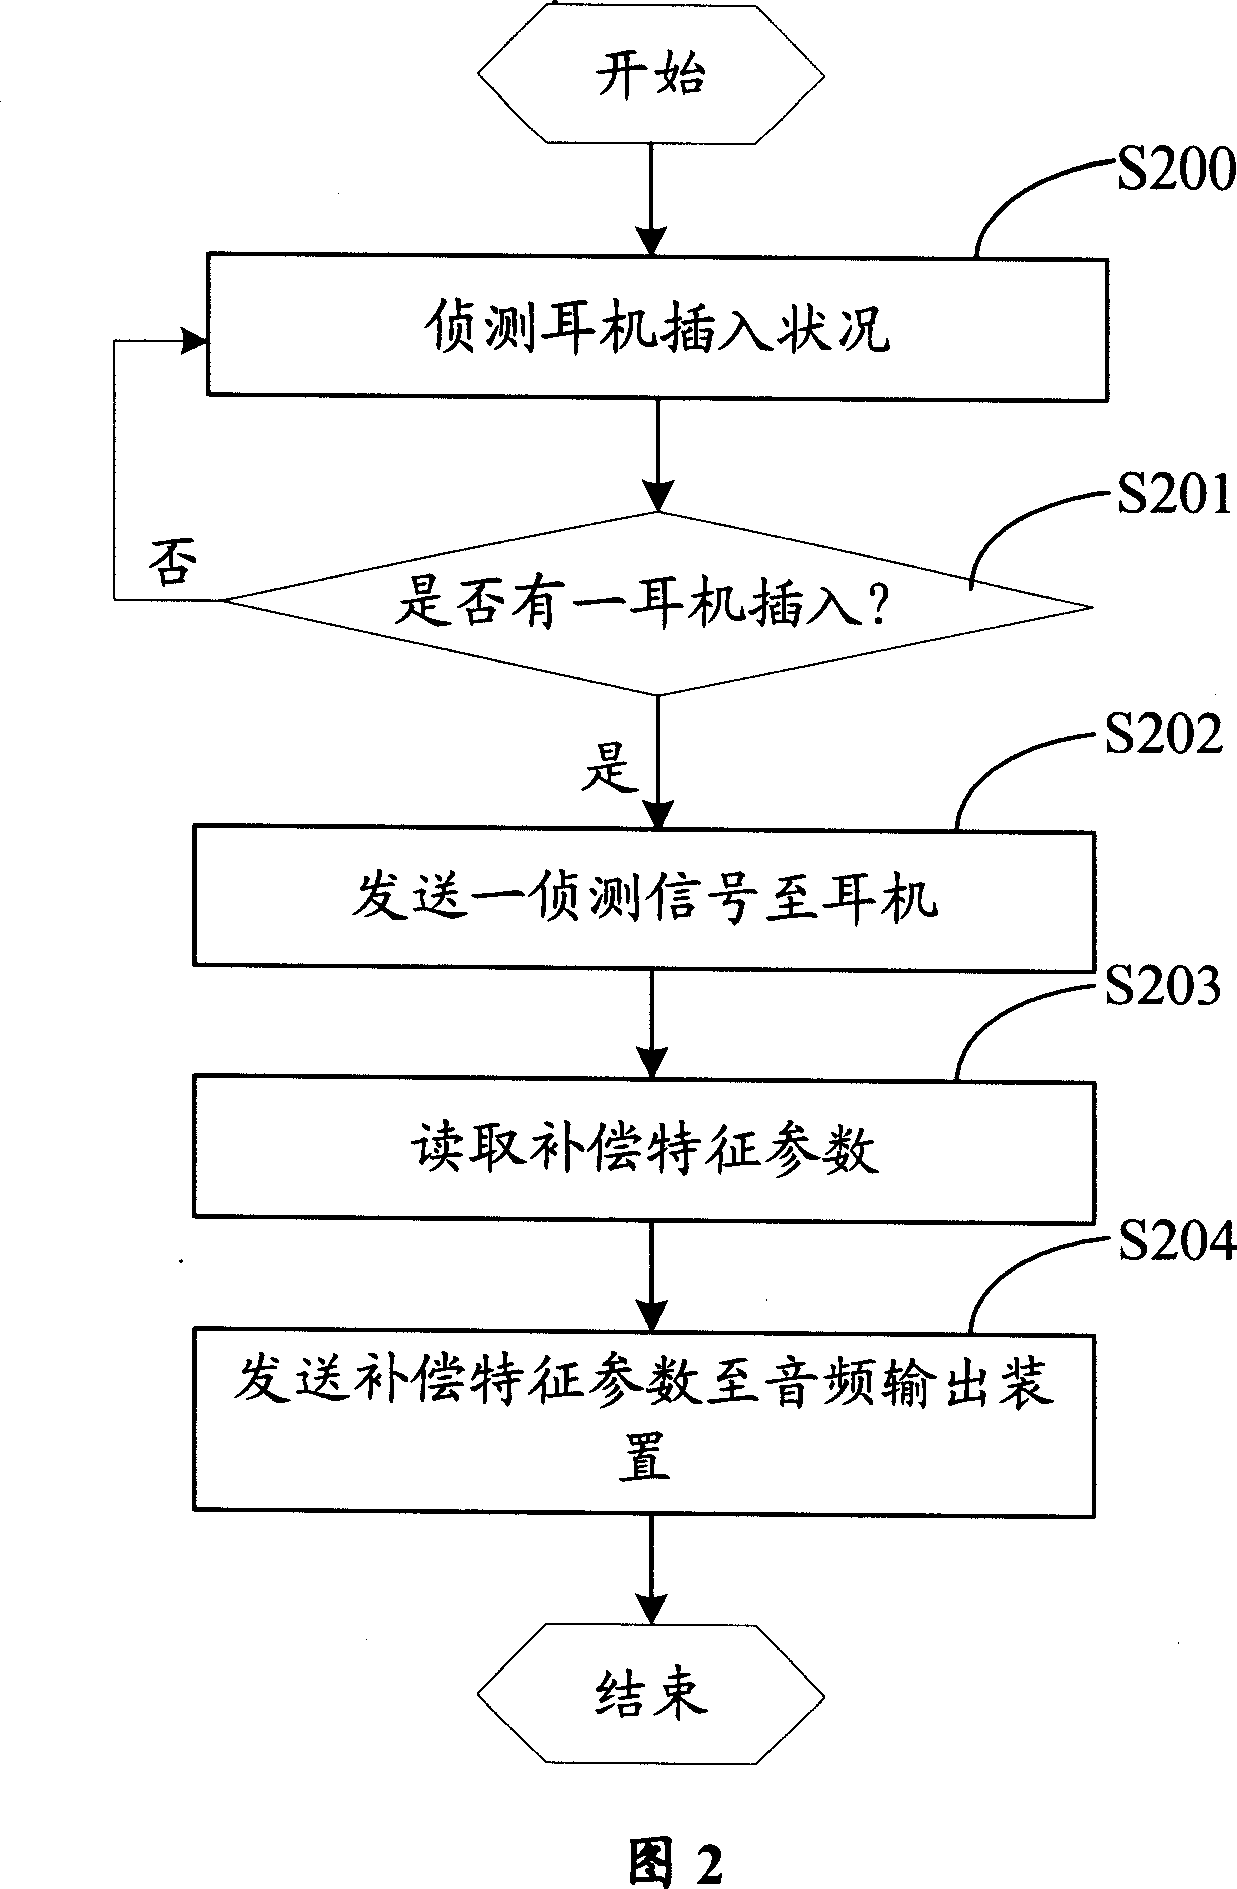 Sound output system and method